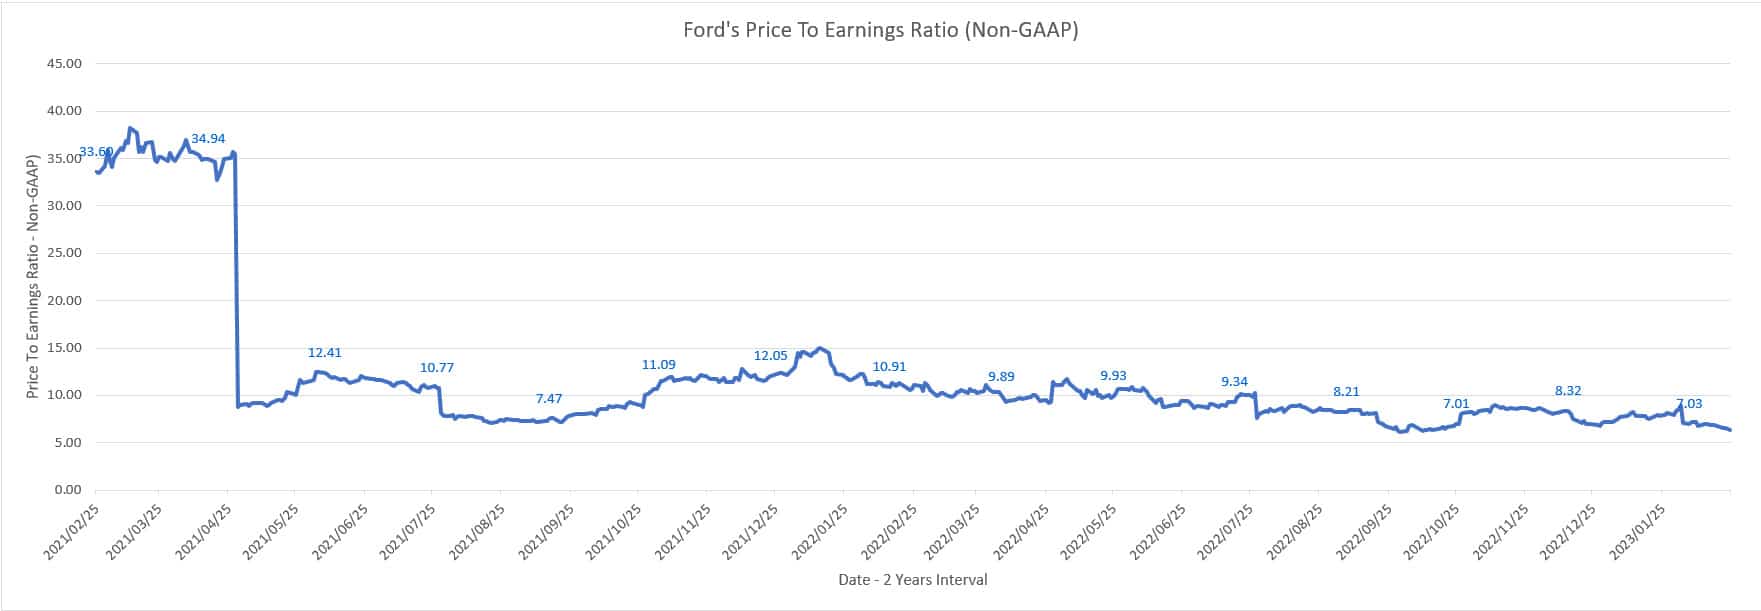 Ford's price to earnings ratio